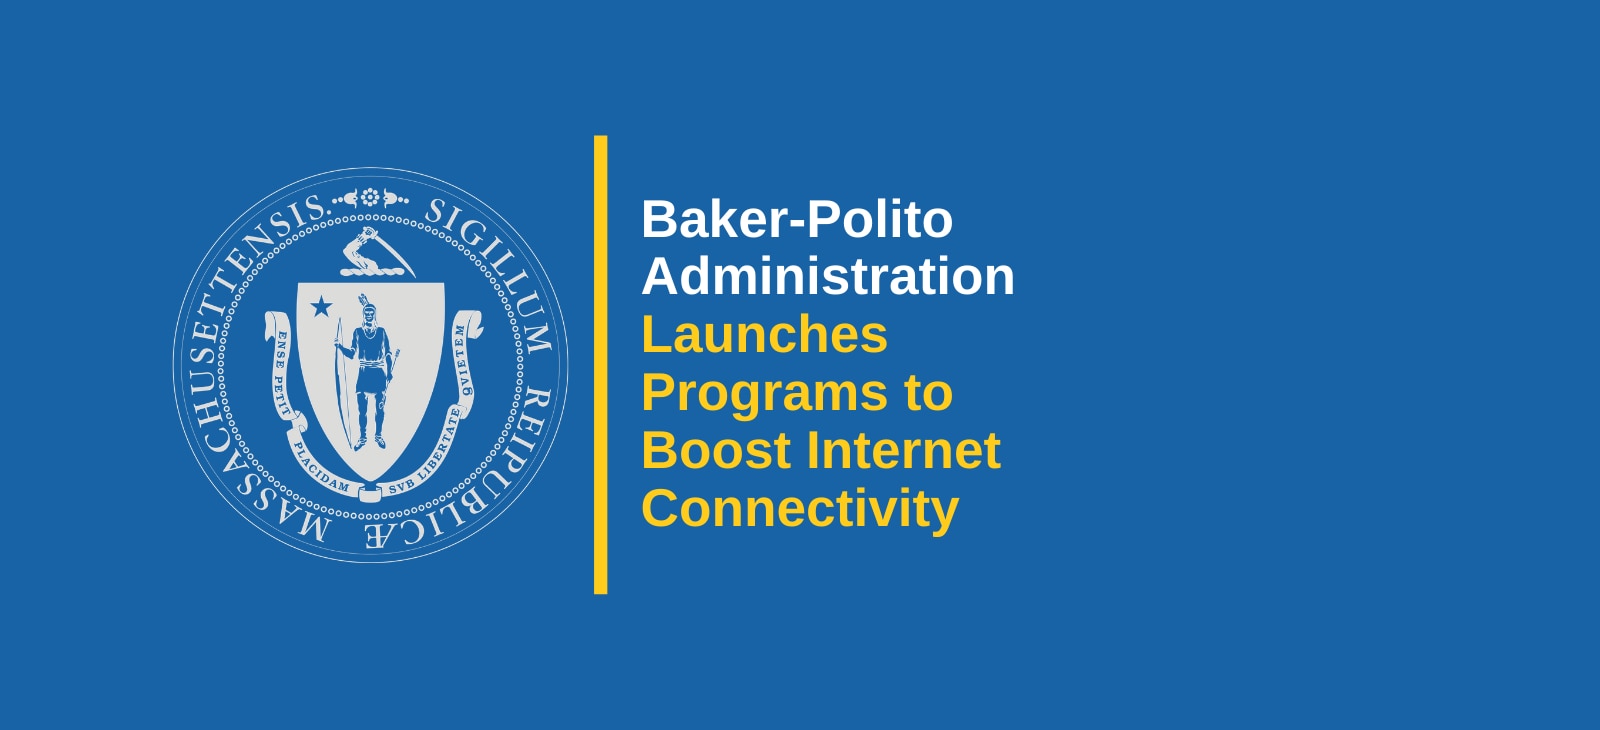 Baker-Polito Administration Launches Programs to Boost Internet Connectivity